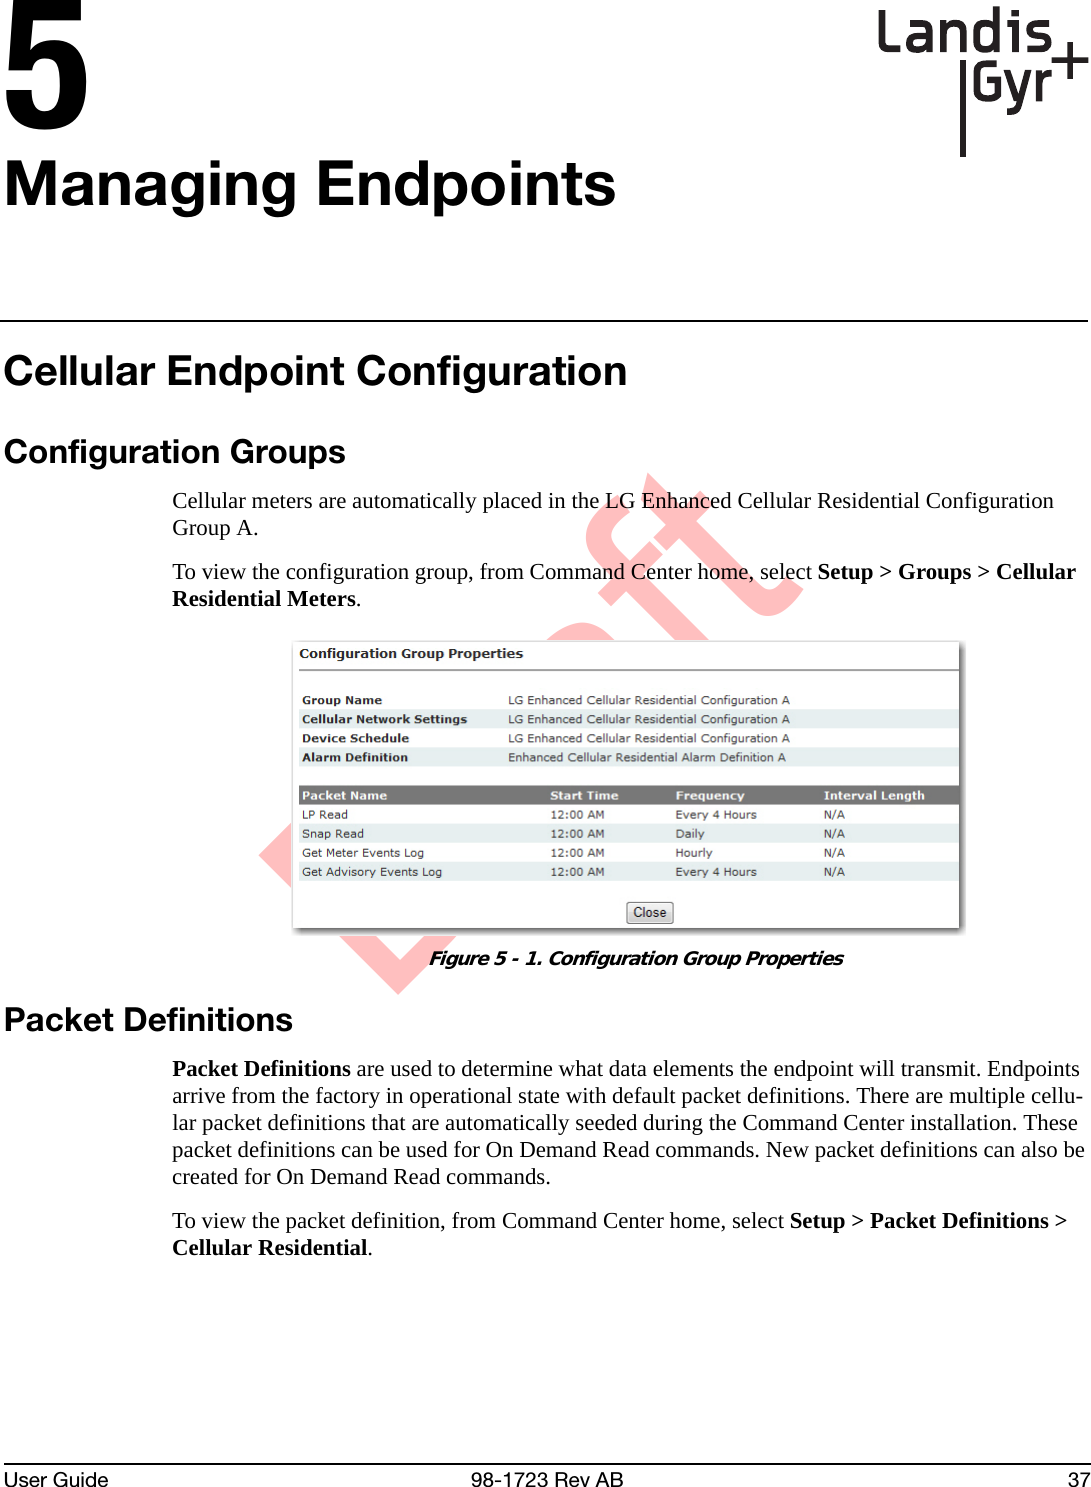 DraftUser Guide 98-1723 Rev AB 375Managing EndpointsCellular Endpoint ConfigurationConfiguration GroupsCellular meters are automatically placed in the LG Enhanced Cellular Residential Configuration Group A.To view the configuration group, from Command Center home, select Setup &gt; Groups &gt; Cellular Residential Meters. Figure 5 - 1. Configuration Group PropertiesPacket DefinitionsPacket Definitions are used to determine what data elements the endpoint will transmit. Endpoints arrive from the factory in operational state with default packet definitions. There are multiple cellu-lar packet definitions that are automatically seeded during the Command Center installation. These packet definitions can be used for On Demand Read commands. New packet definitions can also be created for On Demand Read commands. To view the packet definition, from Command Center home, select Setup &gt; Packet Definitions &gt; Cellular Residential.